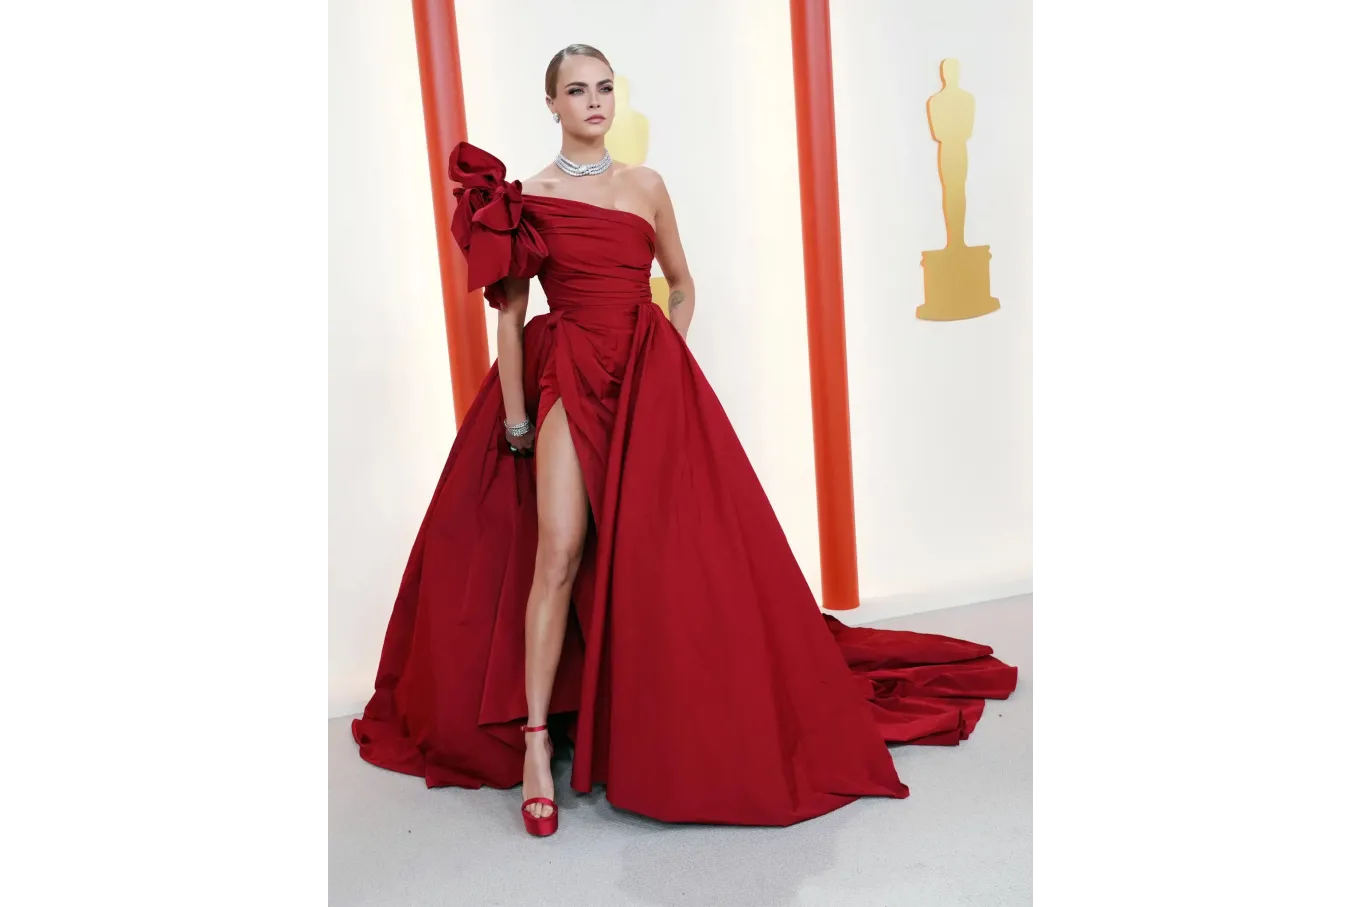 actress Cara Delevingne in a dramatic, deep red dress, with a leg slit and asymmetric sleeve